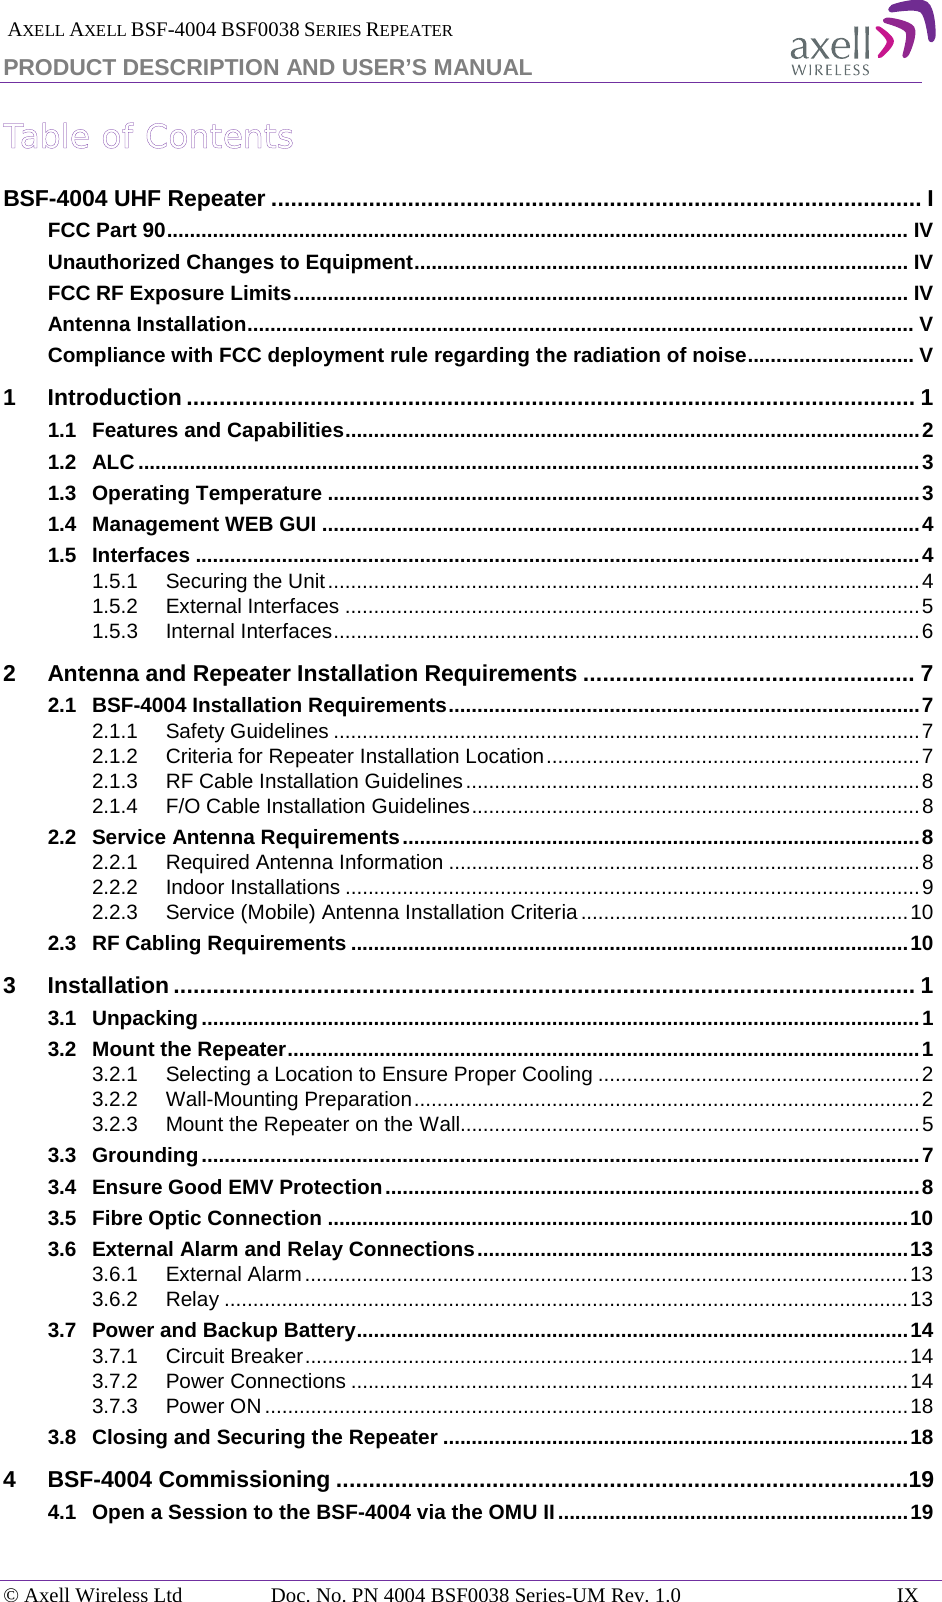  AXELL AXELL BSF-4004 BSF0038 SERIES REPEATER PRODUCT DESCRIPTION AND USER’S MANUAL Table of Contents BSF-4004 UHF Repeater .................................................................................................... I FCC Part 90 ................................................................................................................................. IV Unauthorized Changes to Equipment ...................................................................................... IV FCC RF Exposure Limits ........................................................................................................... IV Antenna Installation .................................................................................................................... V Compliance with FCC deployment rule regarding the radiation of noise ............................. V 1 Introduction ................................................................................................................ 1 1.1 Features and Capabilities .................................................................................................... 2 1.2 ALC ........................................................................................................................................ 3 1.3 Operating Temperature ....................................................................................................... 3 1.4 Management WEB GUI ........................................................................................................ 4 1.5 Interfaces .............................................................................................................................. 4 1.5.1 Securing the Unit ....................................................................................................... 4 1.5.2 External Interfaces .................................................................................................... 5 1.5.3 Internal Interfaces ...................................................................................................... 6 2 Antenna and Repeater Installation Requirements ................................................... 7 2.1 BSF-4004 Installation Requirements .................................................................................. 7 2.1.1 Safety Guidelines ...................................................................................................... 7 2.1.2 Criteria for Repeater Installation Location ................................................................. 7 2.1.3 RF Cable Installation Guidelines ............................................................................... 8 2.1.4 F/O Cable Installation Guidelines .............................................................................. 8 2.2 Service Antenna Requirements .......................................................................................... 8 2.2.1 Required Antenna Information .................................................................................. 8 2.2.2 Indoor Installations .................................................................................................... 9 2.2.3 Service (Mobile) Antenna Installation Criteria ......................................................... 10 2.3 RF Cabling Requirements ................................................................................................. 10 3 Installation .................................................................................................................. 1 3.1 Unpacking ............................................................................................................................. 1 3.2 Mount the Repeater .............................................................................................................. 1 3.2.1 Selecting a Location to Ensure Proper Cooling ........................................................ 2 3.2.2 Wall-Mounting Preparation ........................................................................................ 2 3.2.3 Mount the Repeater on the Wall................................................................................ 5 3.3 Grounding ............................................................................................................................. 7 3.4 Ensure Good EMV Protection ............................................................................................. 8 3.5 Fibre Optic Connection ..................................................................................................... 10 3.6 External Alarm and Relay Connections ........................................................................... 13 3.6.1 External Alarm ......................................................................................................... 13 3.6.2 Relay ....................................................................................................................... 13 3.7 Power and Backup Battery ................................................................................................ 14 3.7.1 Circuit Breaker ......................................................................................................... 14 3.7.2 Power Connections ................................................................................................. 14 3.7.3 Power ON ................................................................................................................ 18 3.8 Closing and Securing the Repeater ................................................................................. 18 4 BSF-4004 Commissioning ........................................................................................19 4.1 Open a Session to the BSF-4004 via the OMU II ............................................................. 19 © Axell Wireless Ltd Doc. No. PN 4004 BSF0038 Series-UM Rev. 1.0 IX 